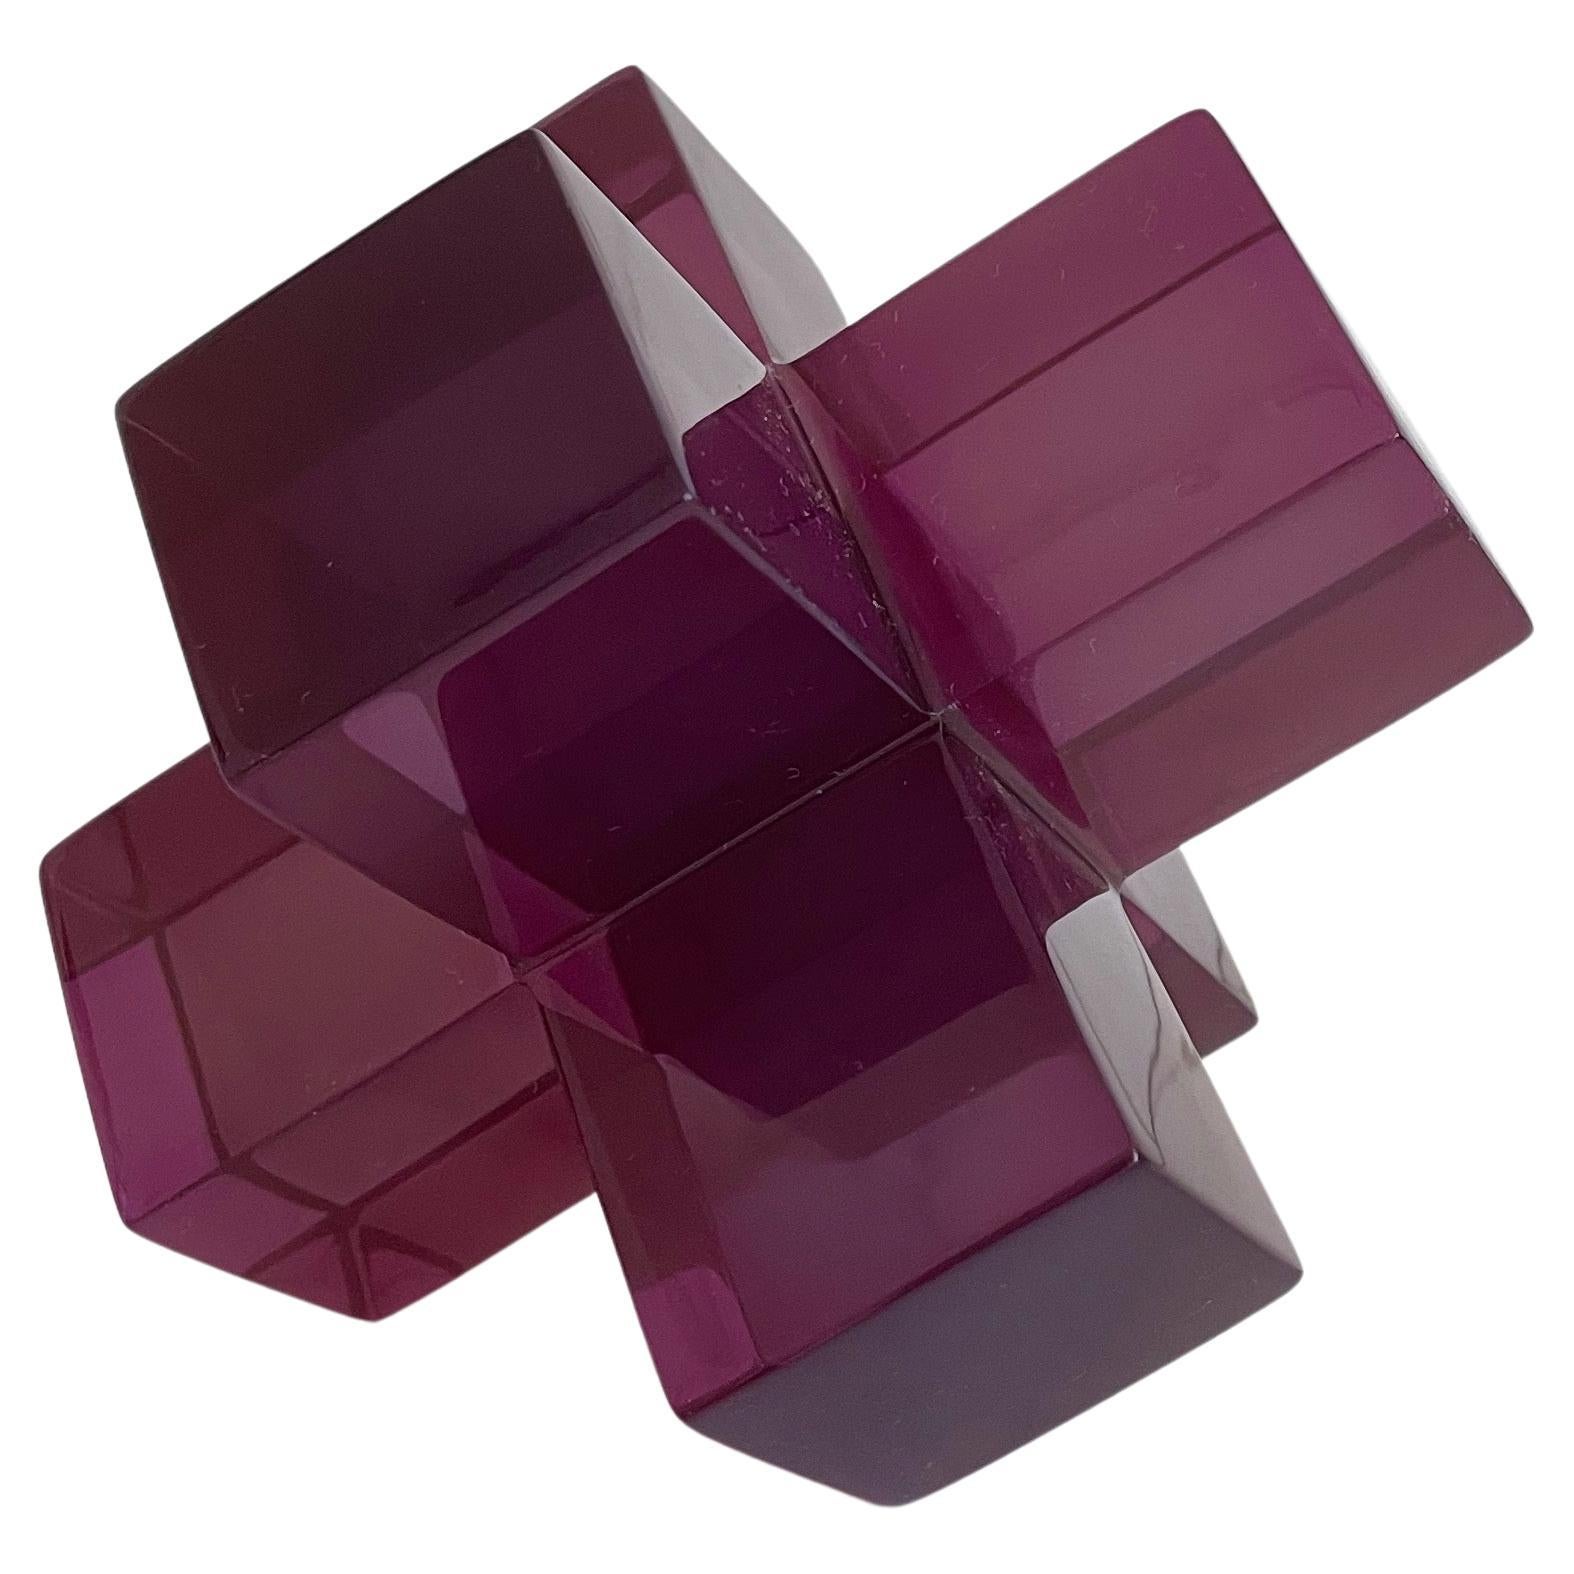 Geometric Sculpture in Polished Resin Color Grape by Paola Valle